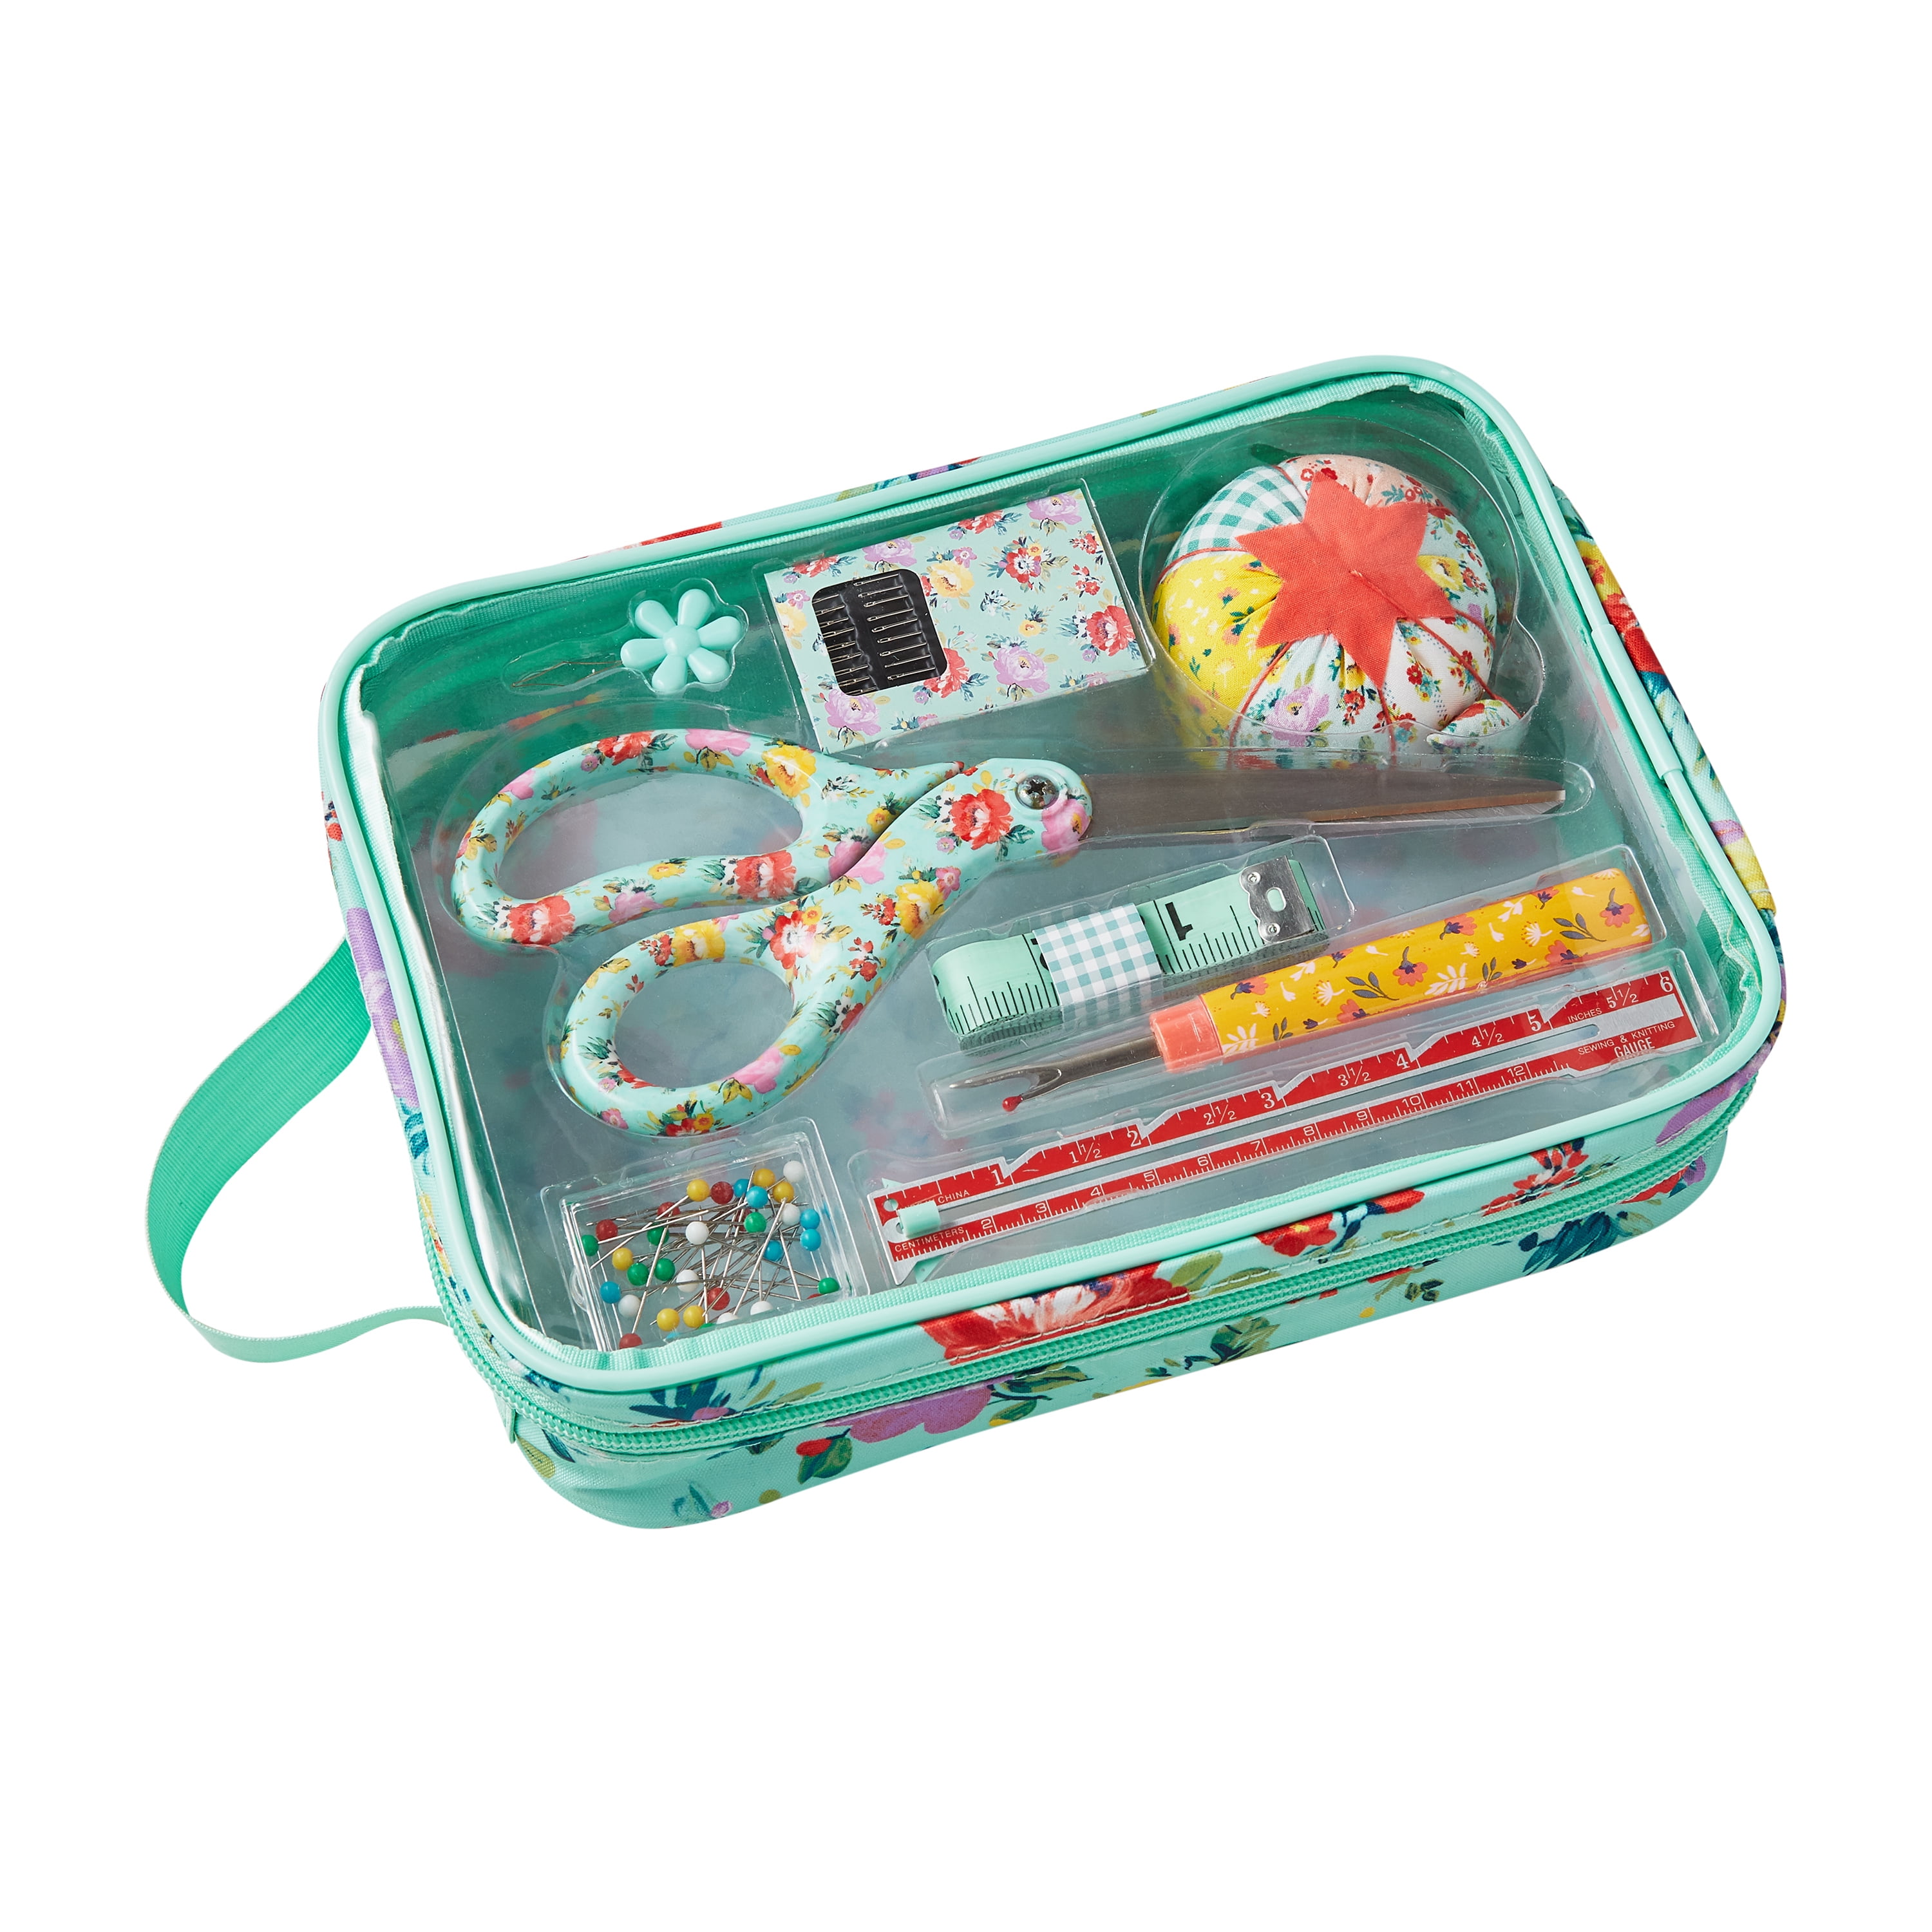 85pcs Portable Sewing Kit Gifts with Case for Grandma Mom Kids